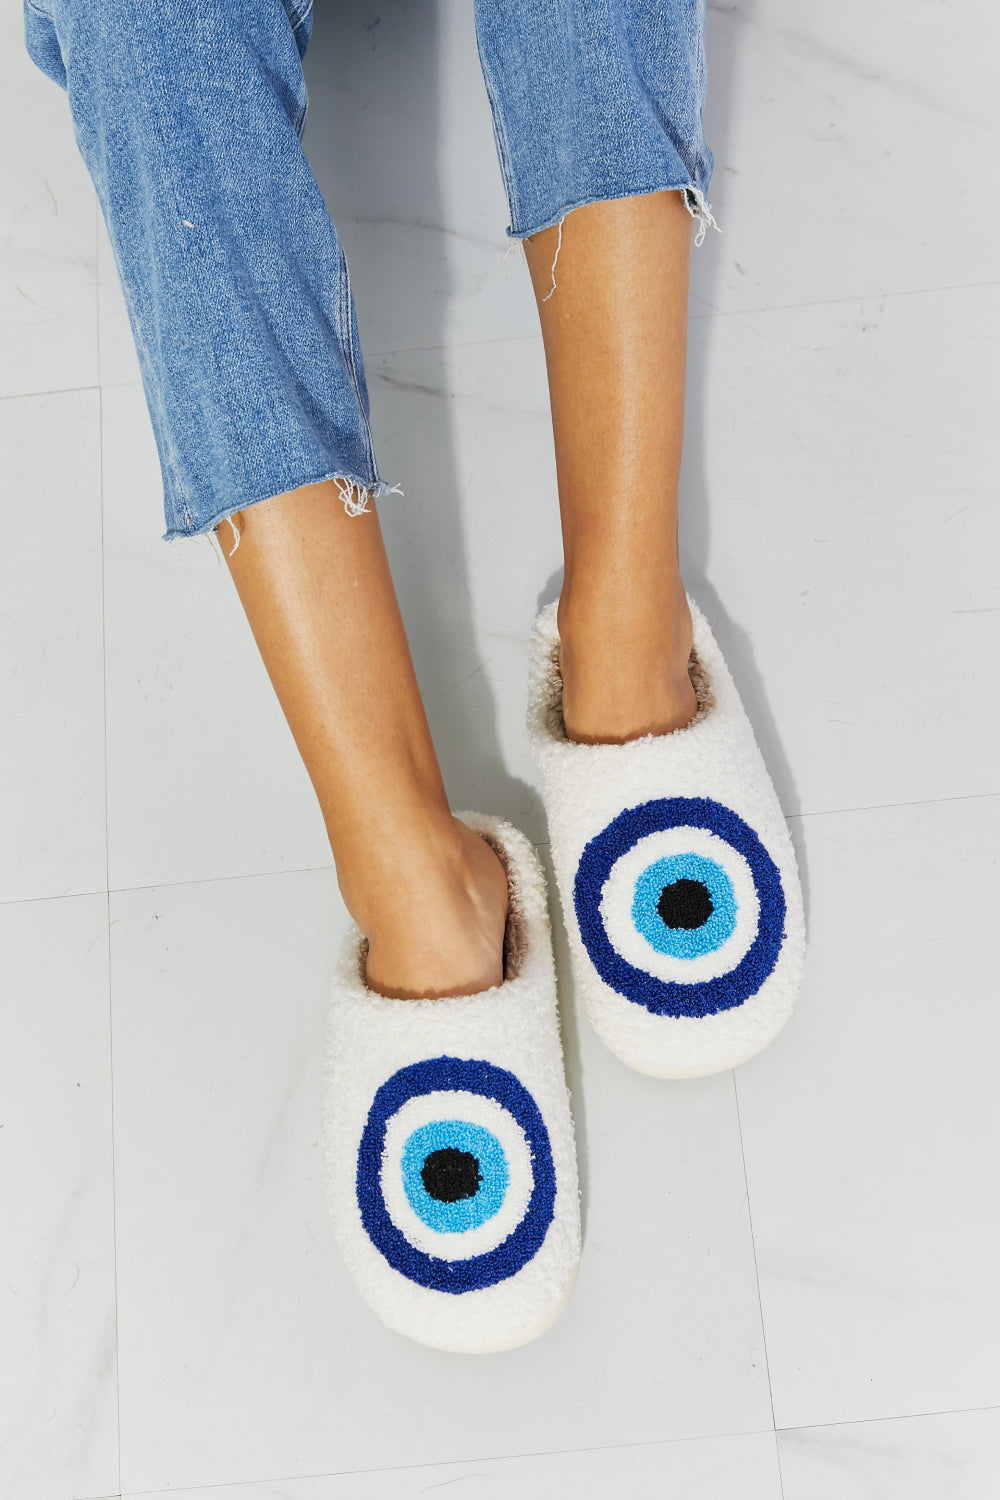 SKY BLUE - MMShoes Eye Plush Slipper - Ships from The US - womens slippers at TFC&H Co.